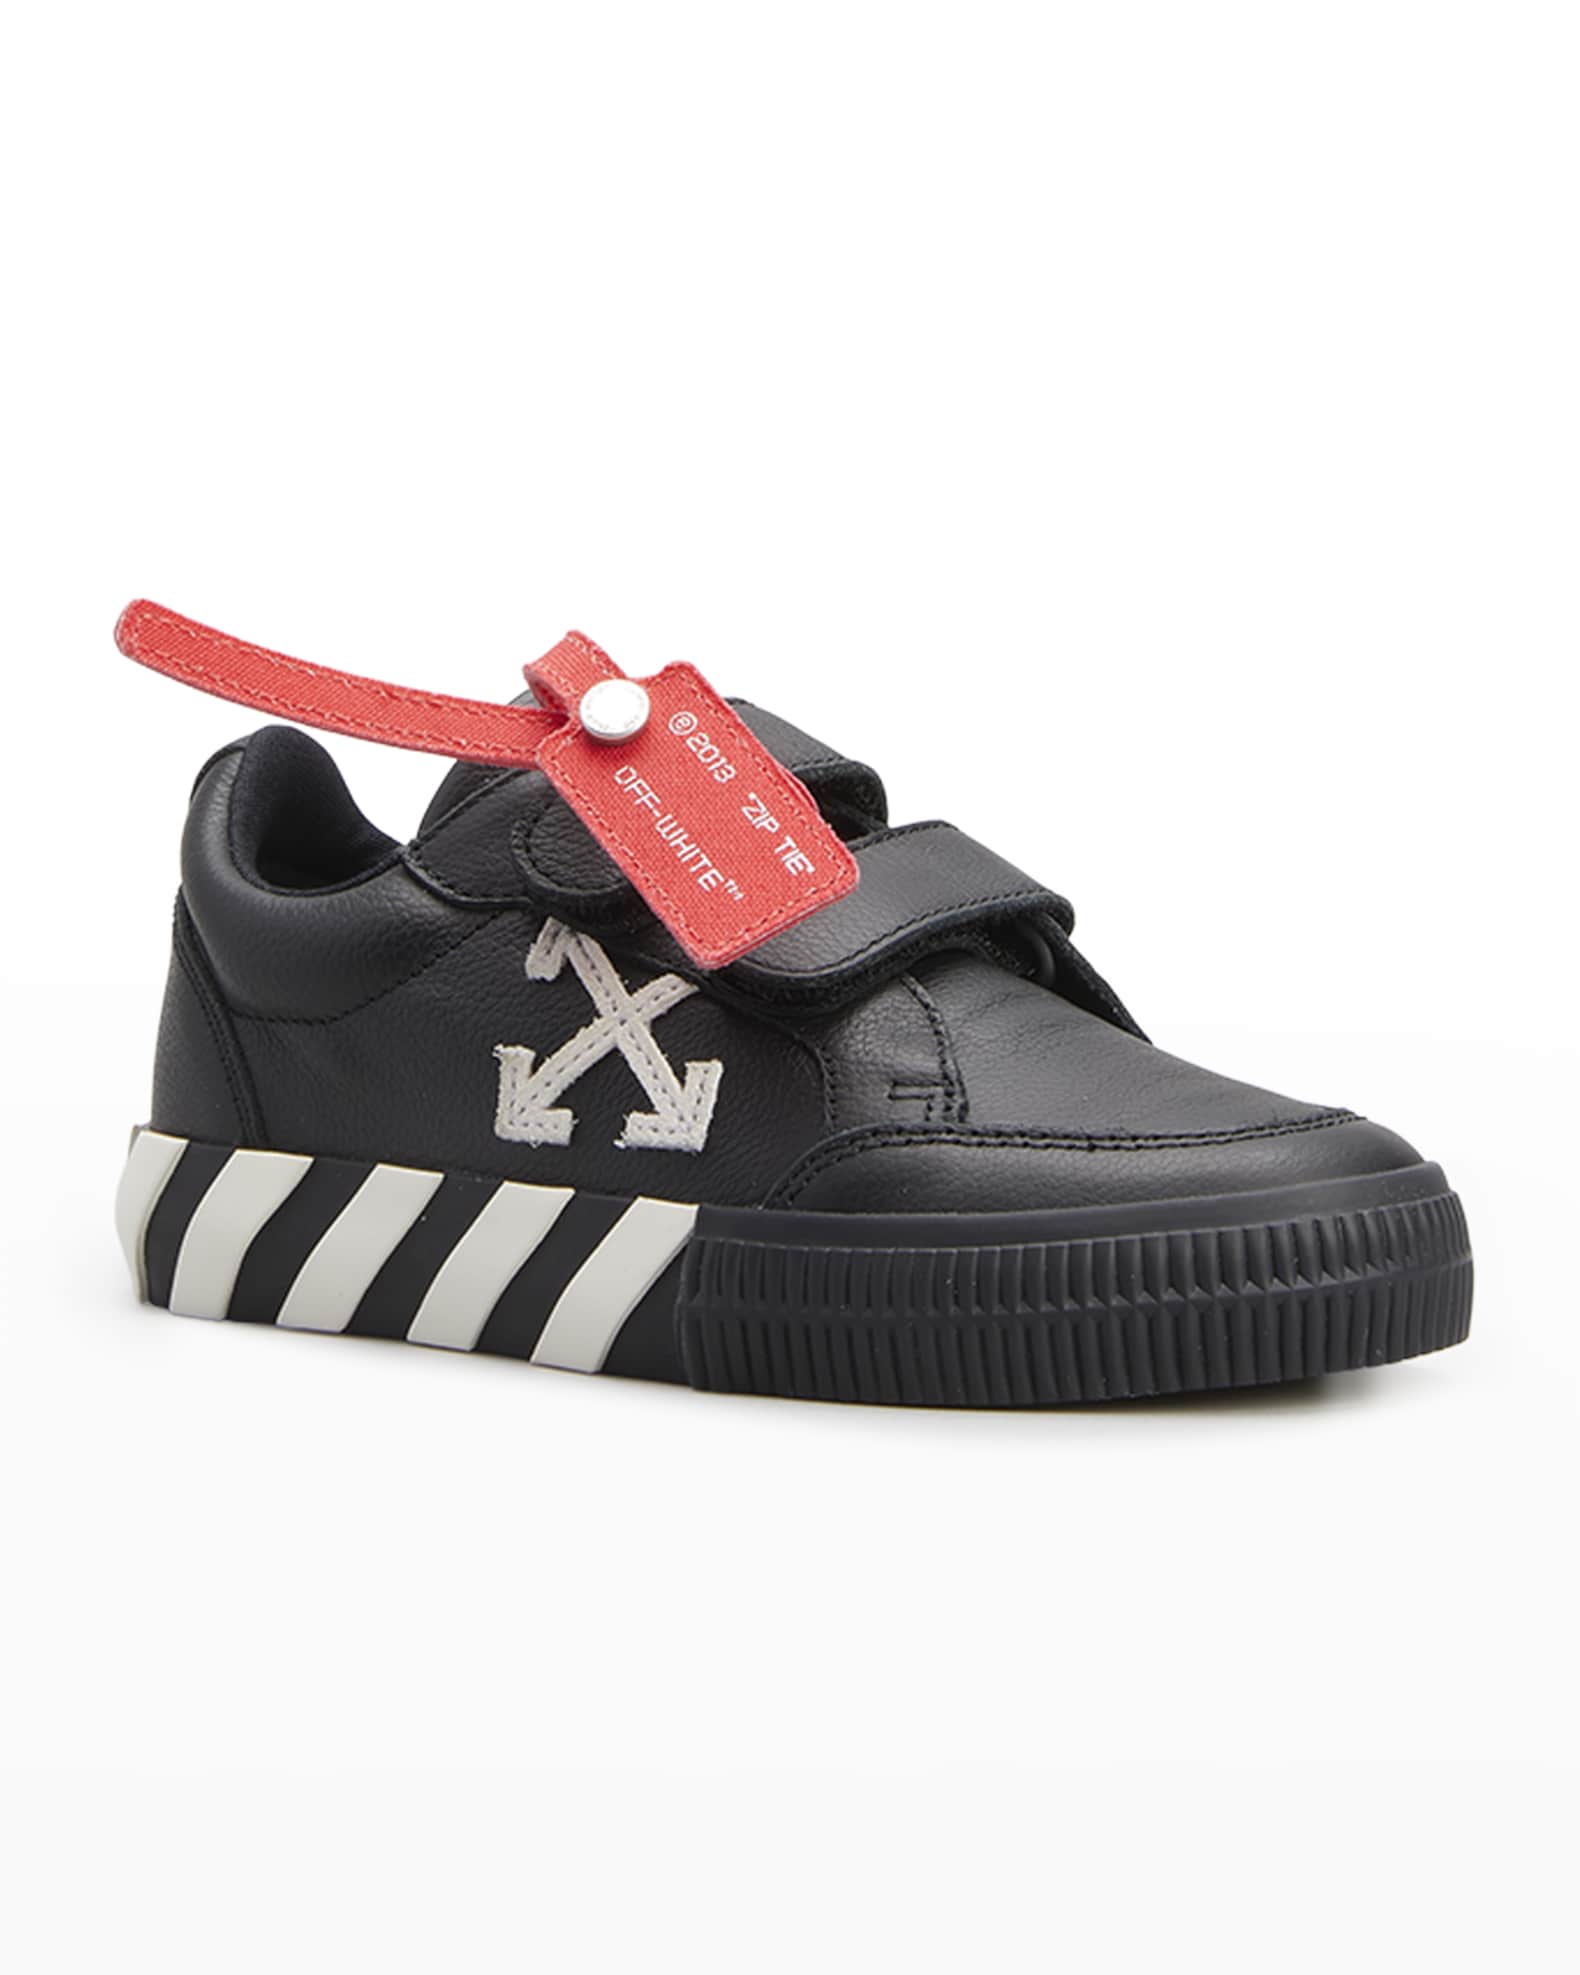 Off-White Kid's Arrow Stripe Leather Sneakers, Toddler/Kids | Marcus